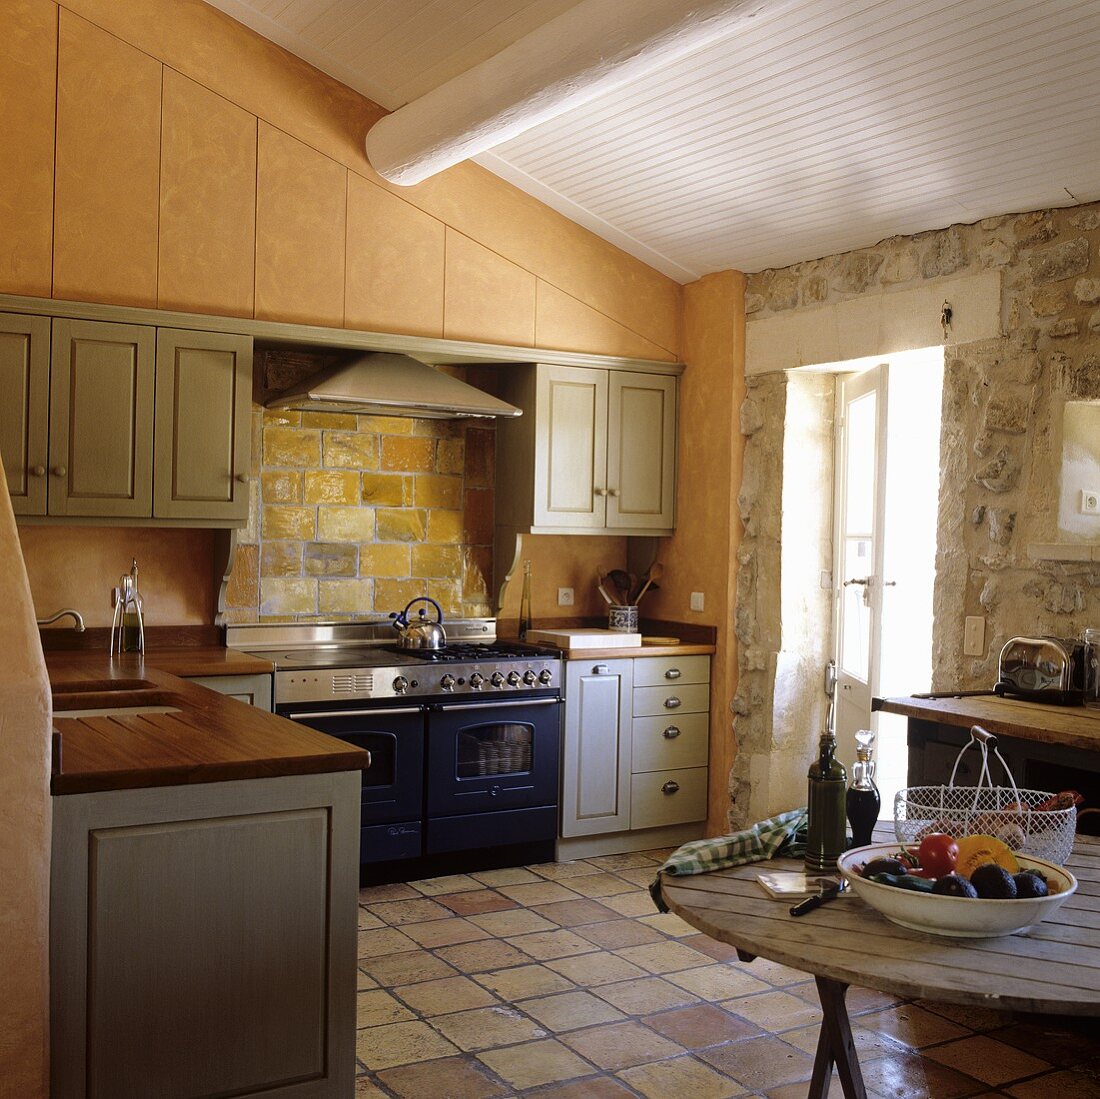 A kitchen in a country house with a natural stone wall